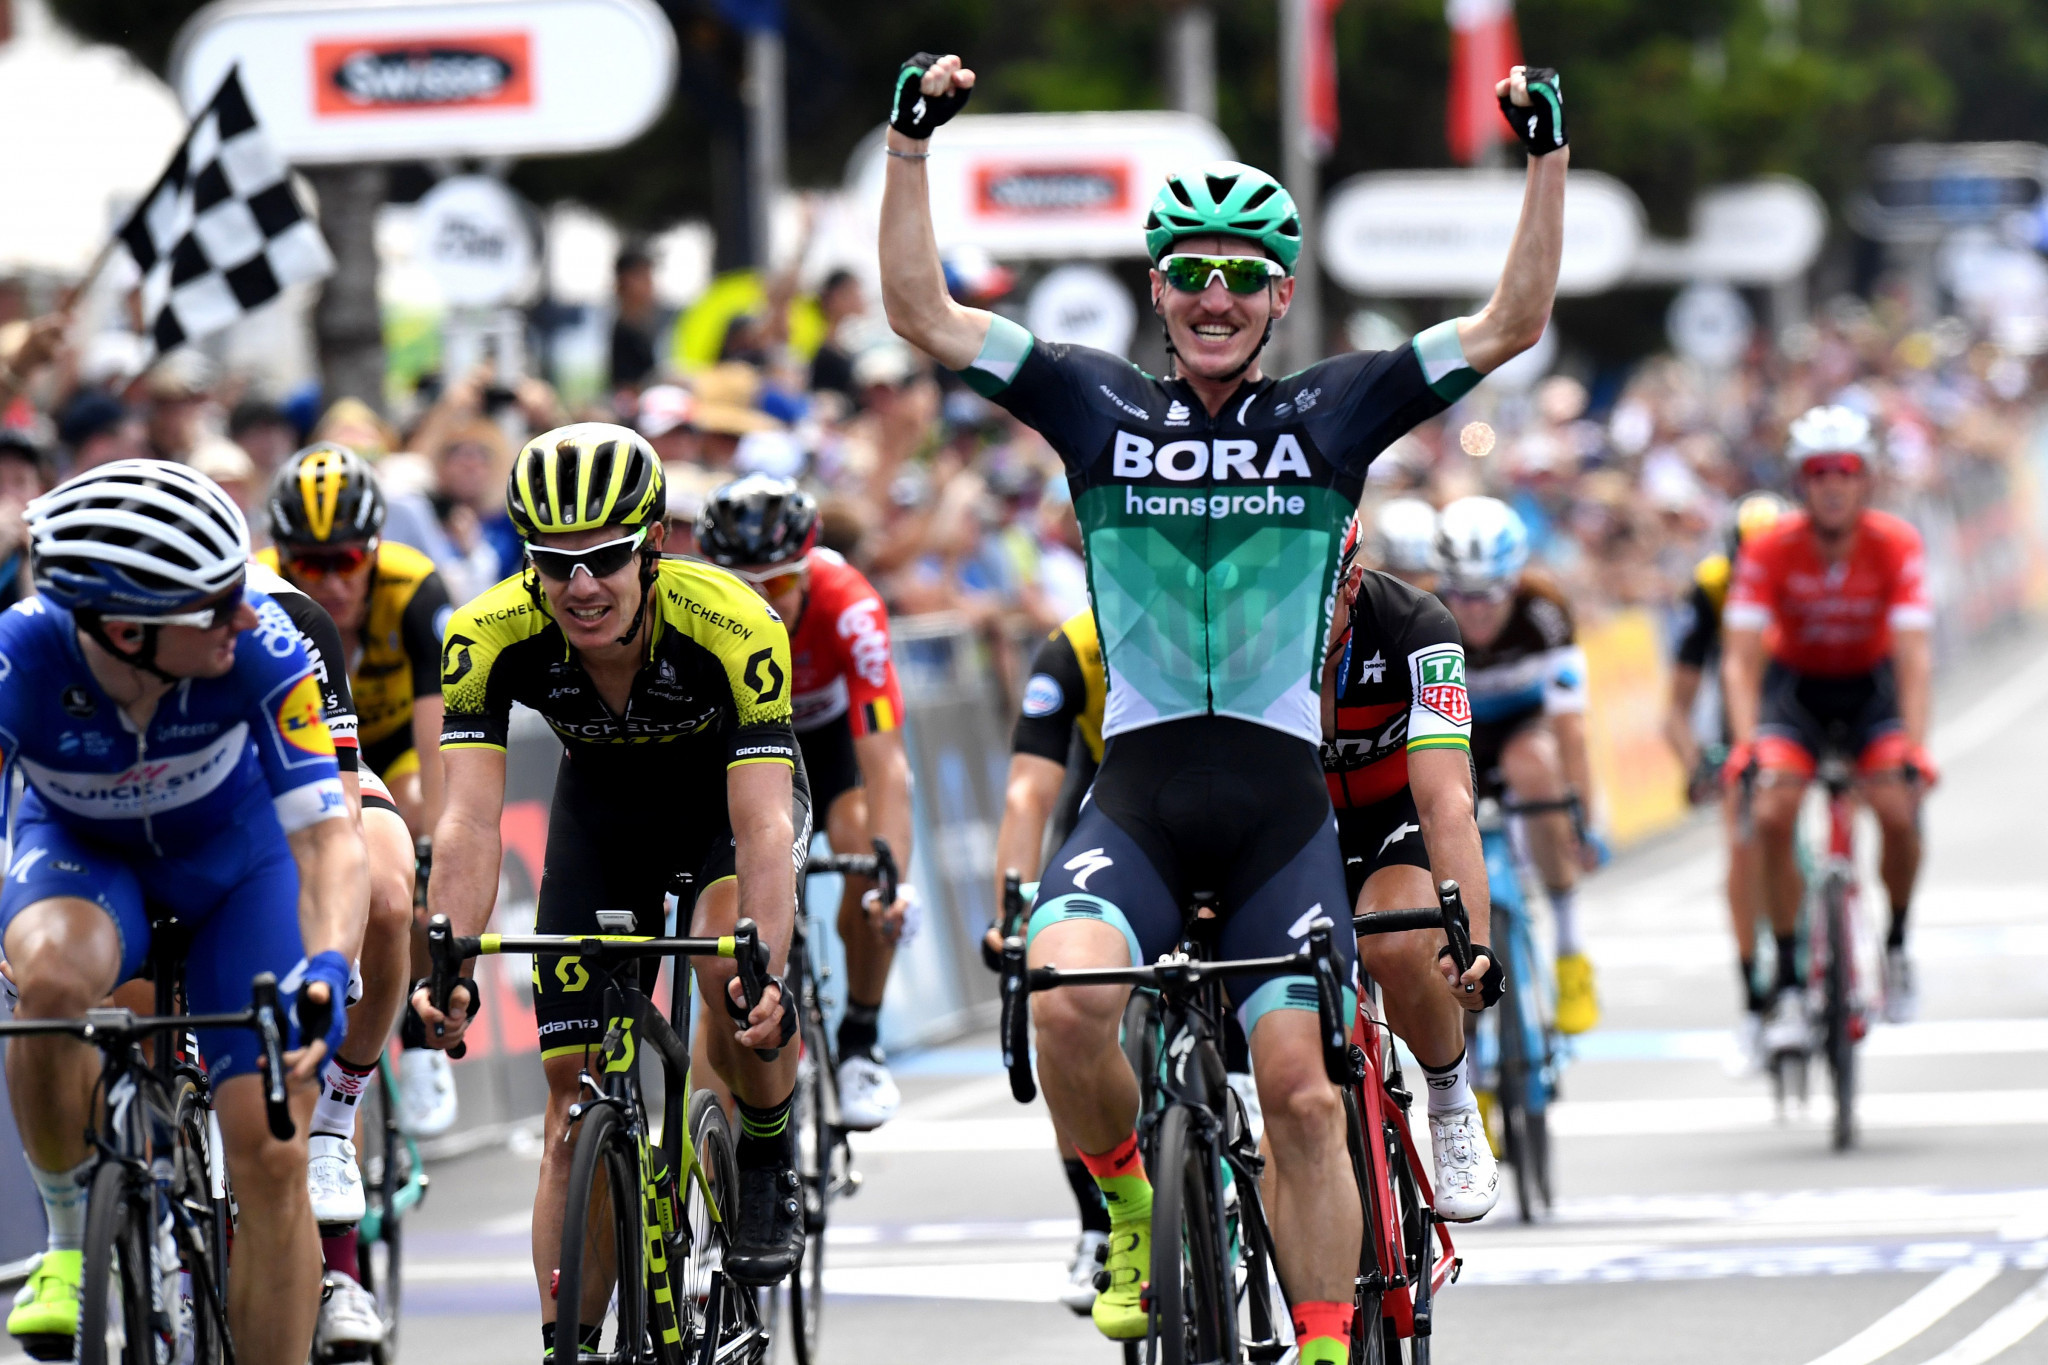 Jay McCarthy won a tense race at the Tour of the Basque Country ©Getty Images